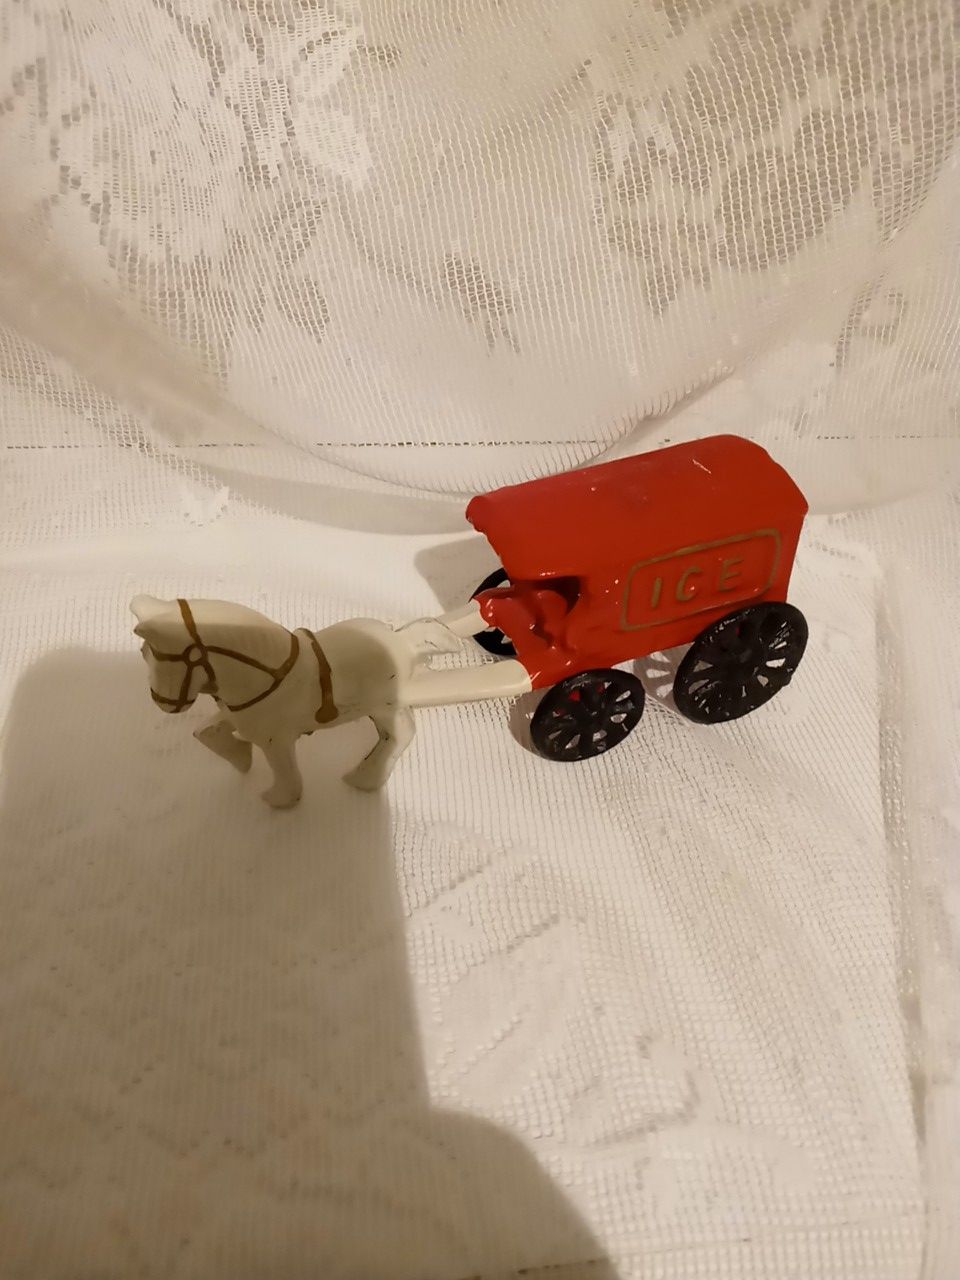 Vintage cast iron toy horse drawn horse wagon early 20th century